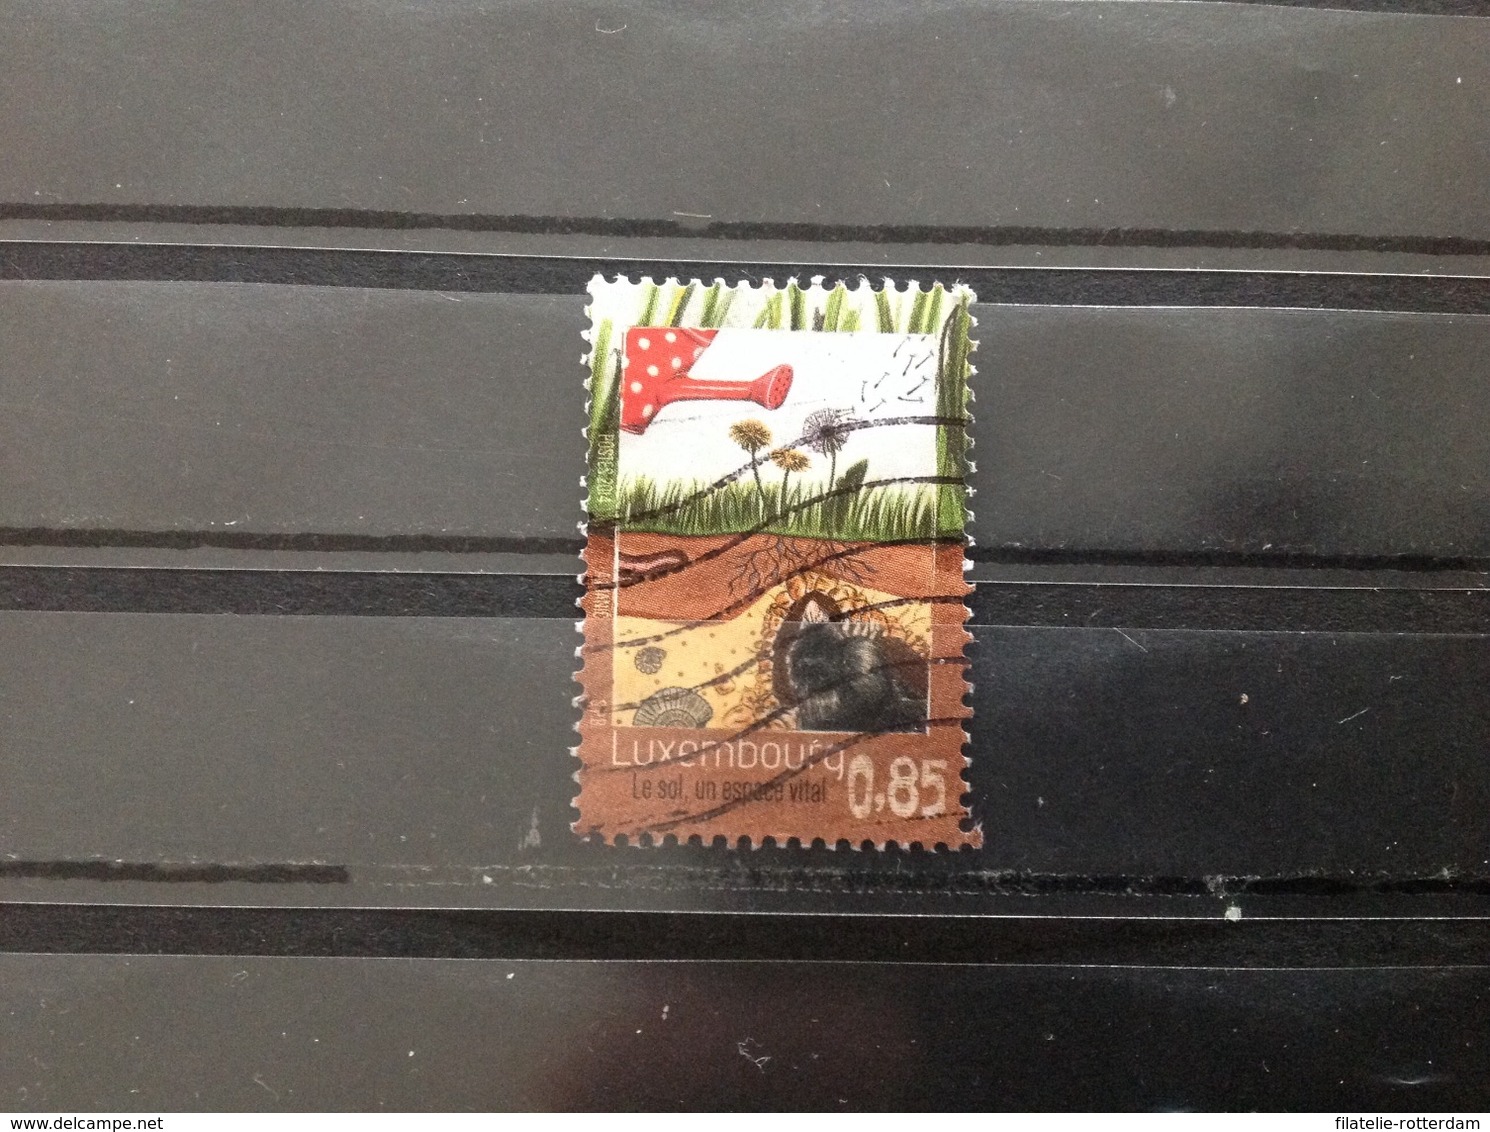 Luxemburg / Luxembourg - Grond Als Leefmilieu (0.85) 2014 - Used Stamps